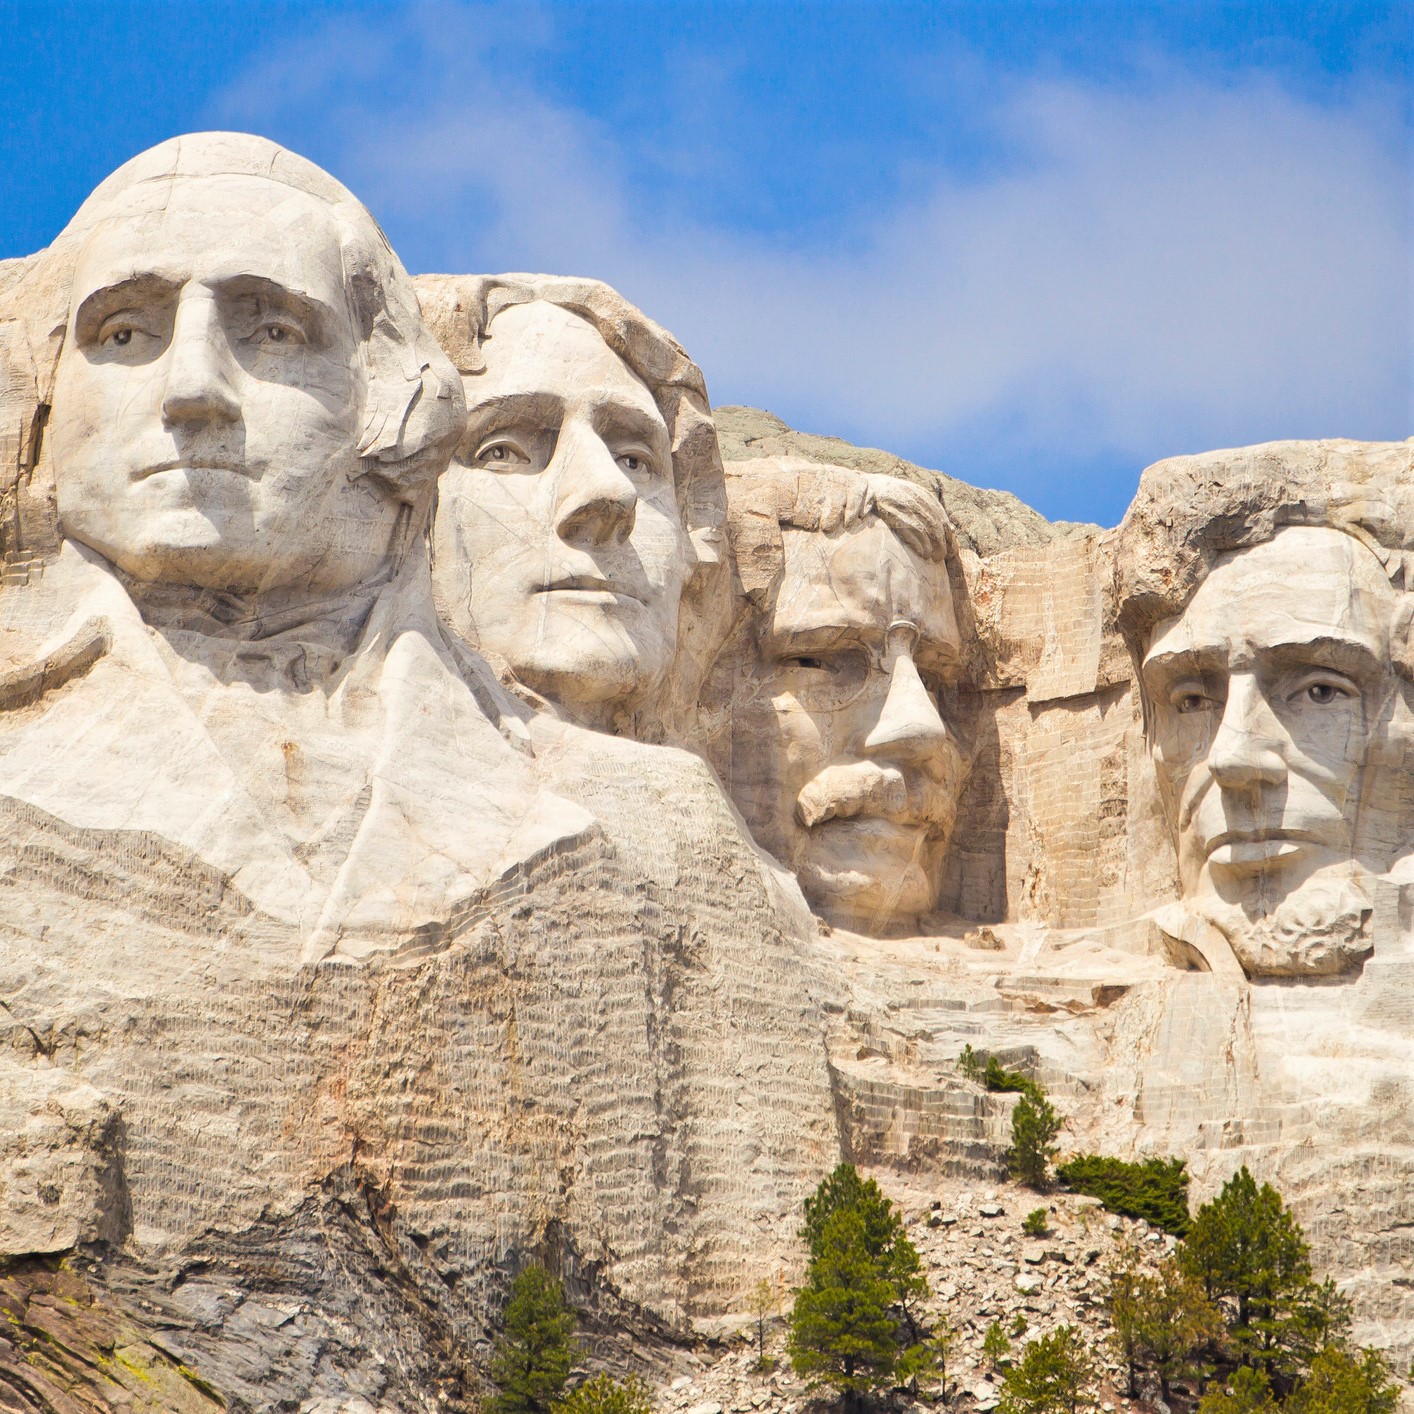 Happy Presidents' Day: Photo of Mount Rushmore